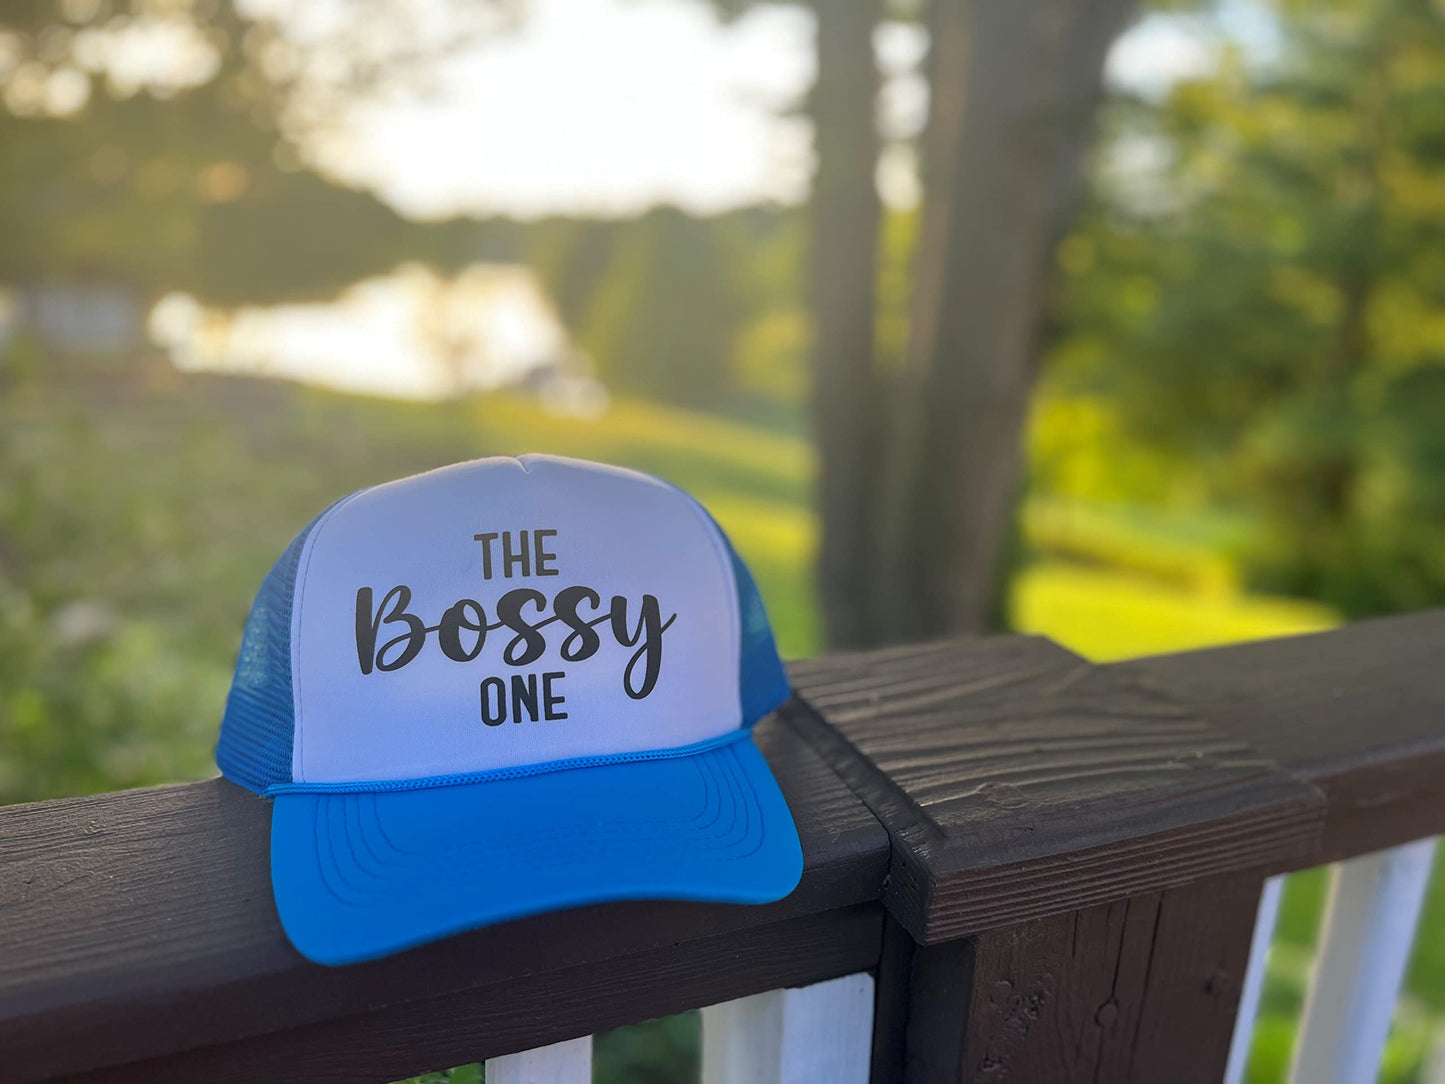 The One Party Trucker Hats by Funky Junque